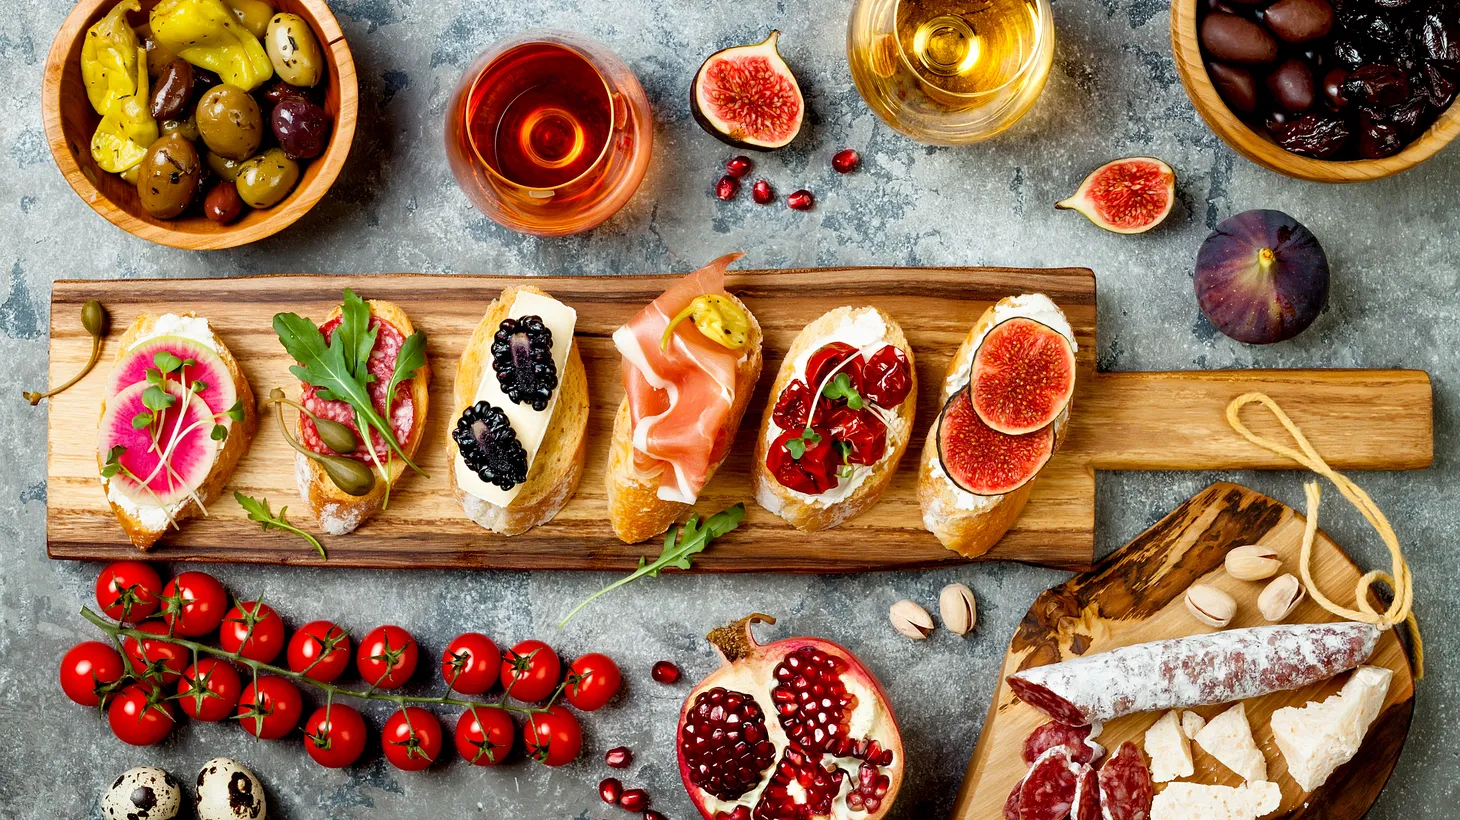 Try serving a no-cook selection of Italian-inspired appetizers for summer grazing.